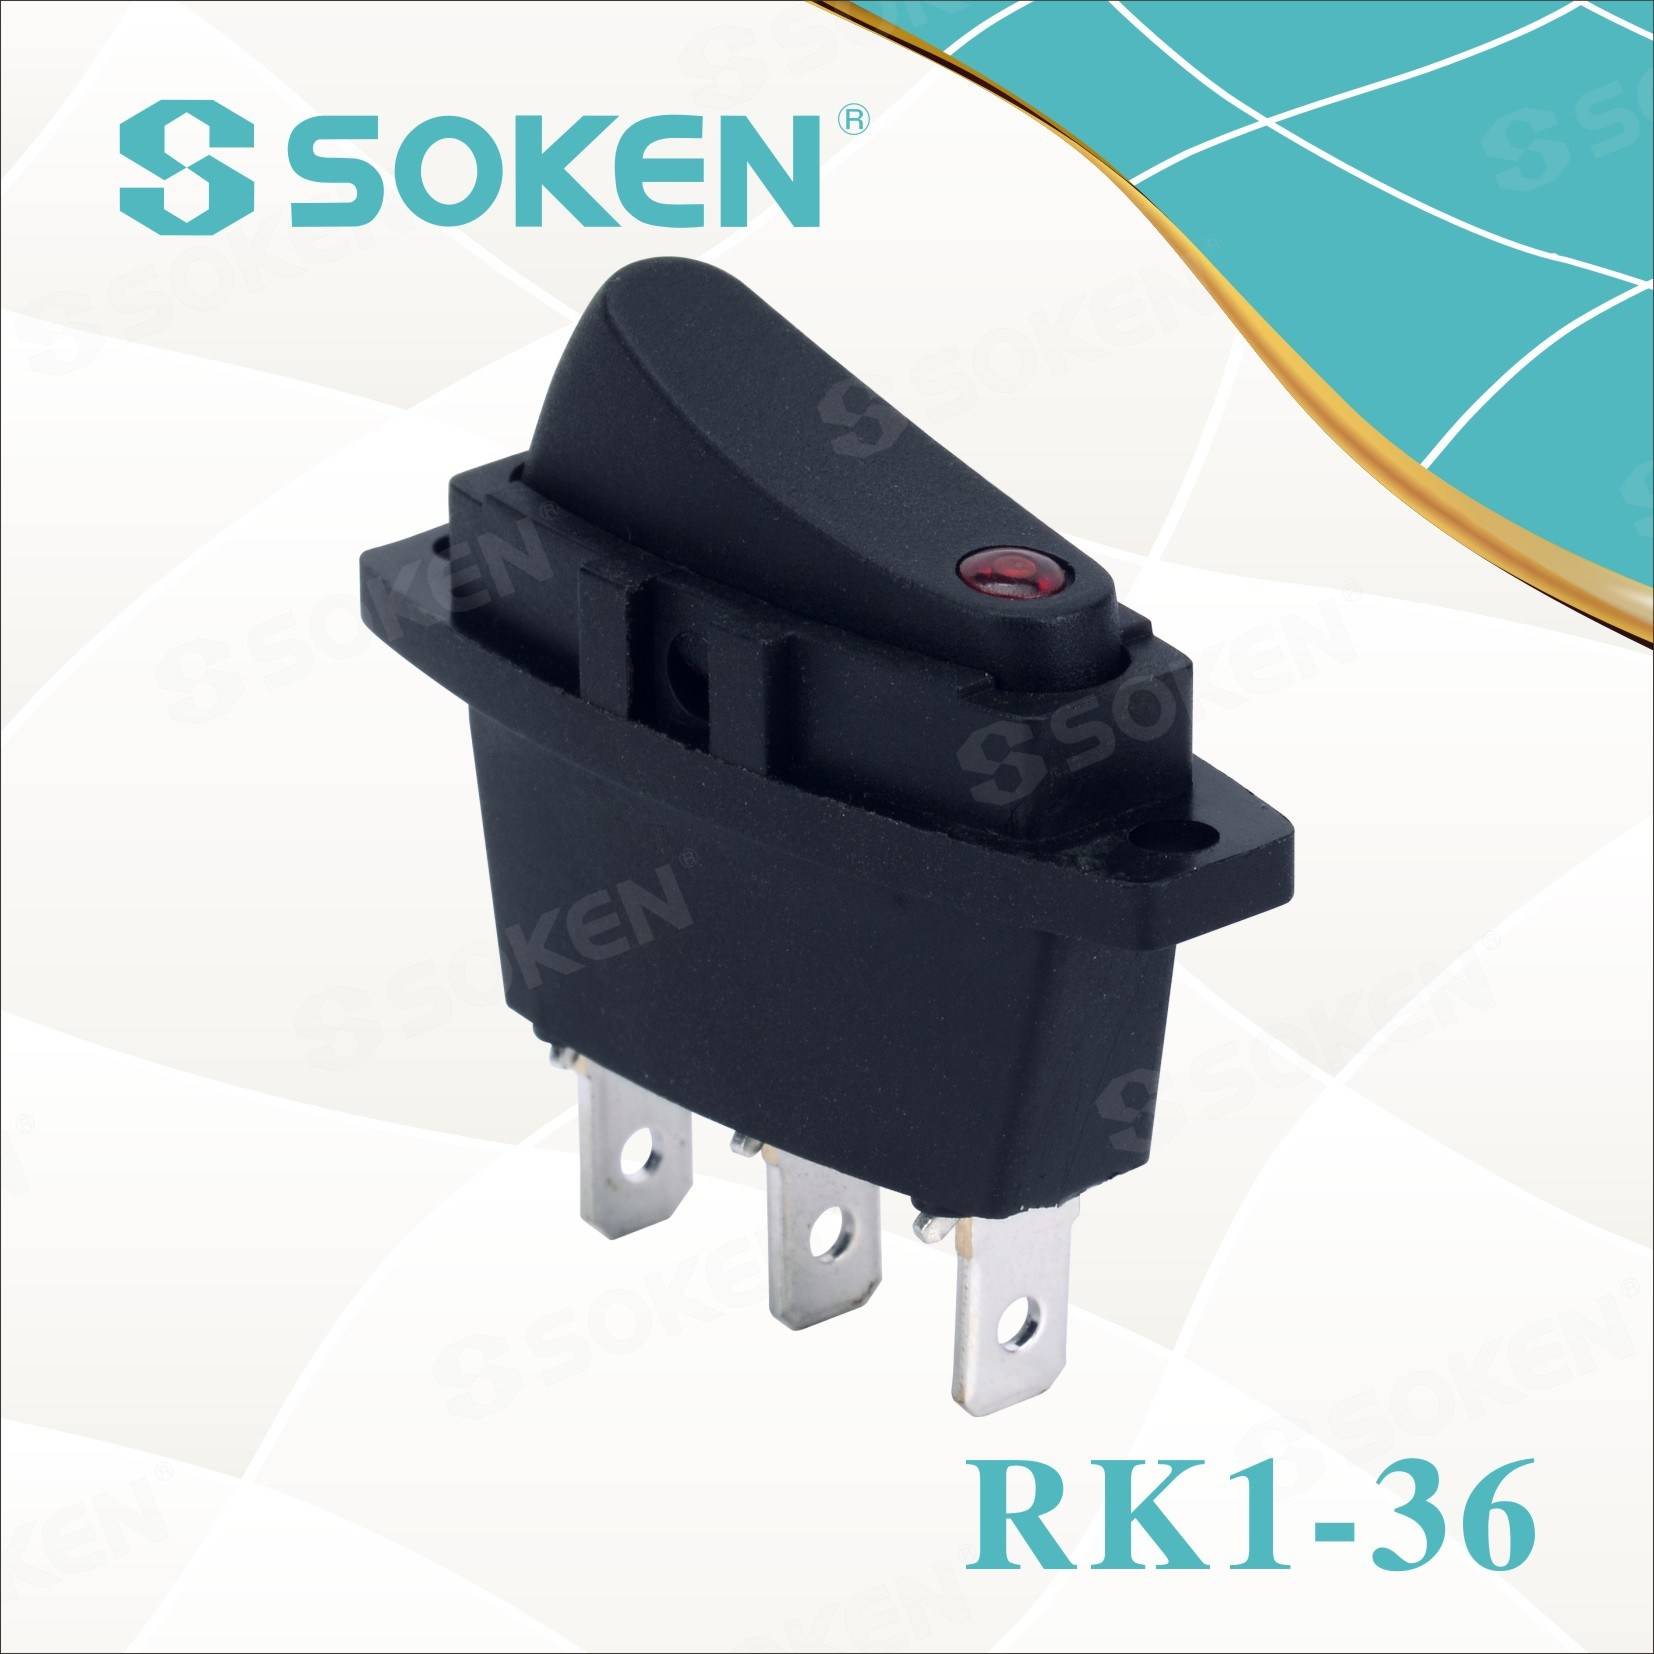 Wholesale Price Low Voltage Safe Push Button Switch -
 Soken Rk1-36 1X1n on off Illuminated Rocker Switch – Master Soken Electrical